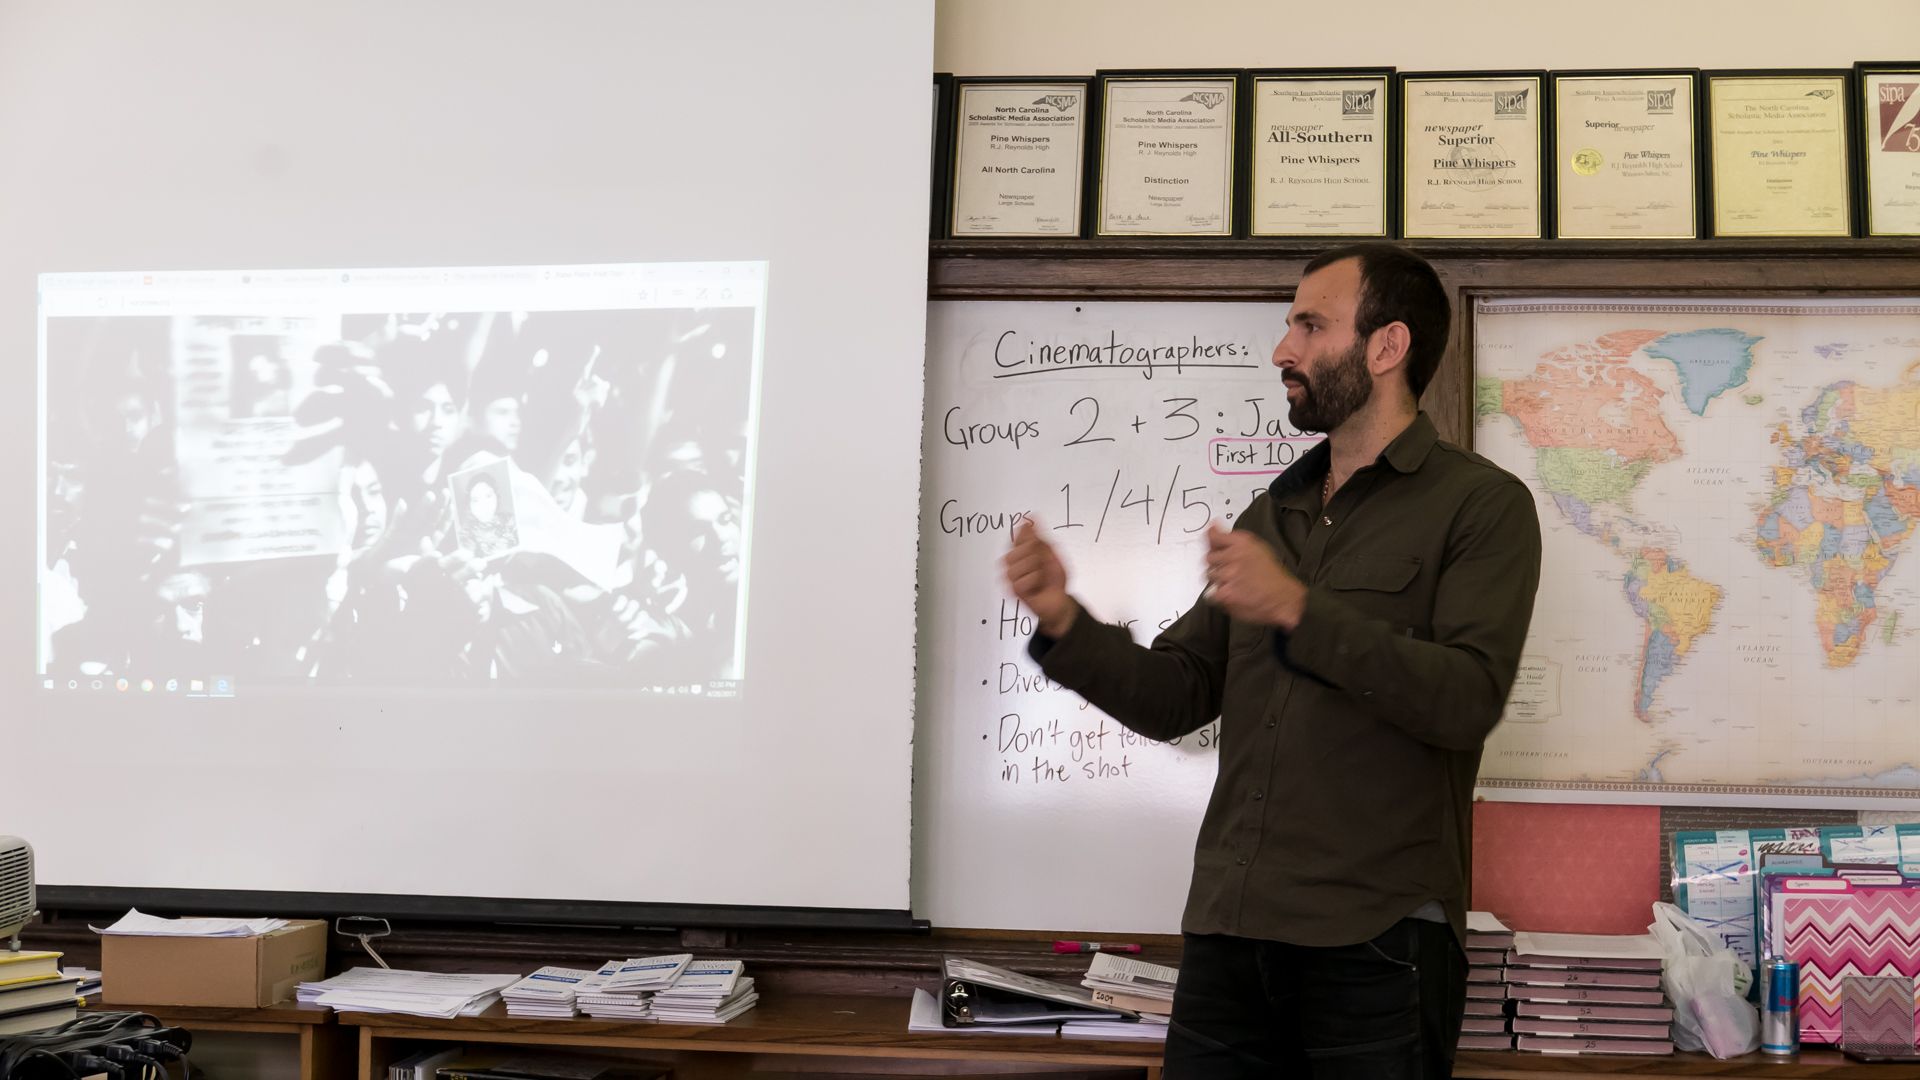 Pulitzer Center grantee Jason Motlagh describes how he reported on the collapse of the Rana Plaza textile factory in Bangladesh for journalism students at RJ Reynolds High School. Motlagh visited over 700 students in Winston-Salem, NC, in April 2017 as part of Pulitzer Center's NewsArts program. His presentation is featured as part of the film Weaving Connections. Image by Diana Greene. United States, 2017.